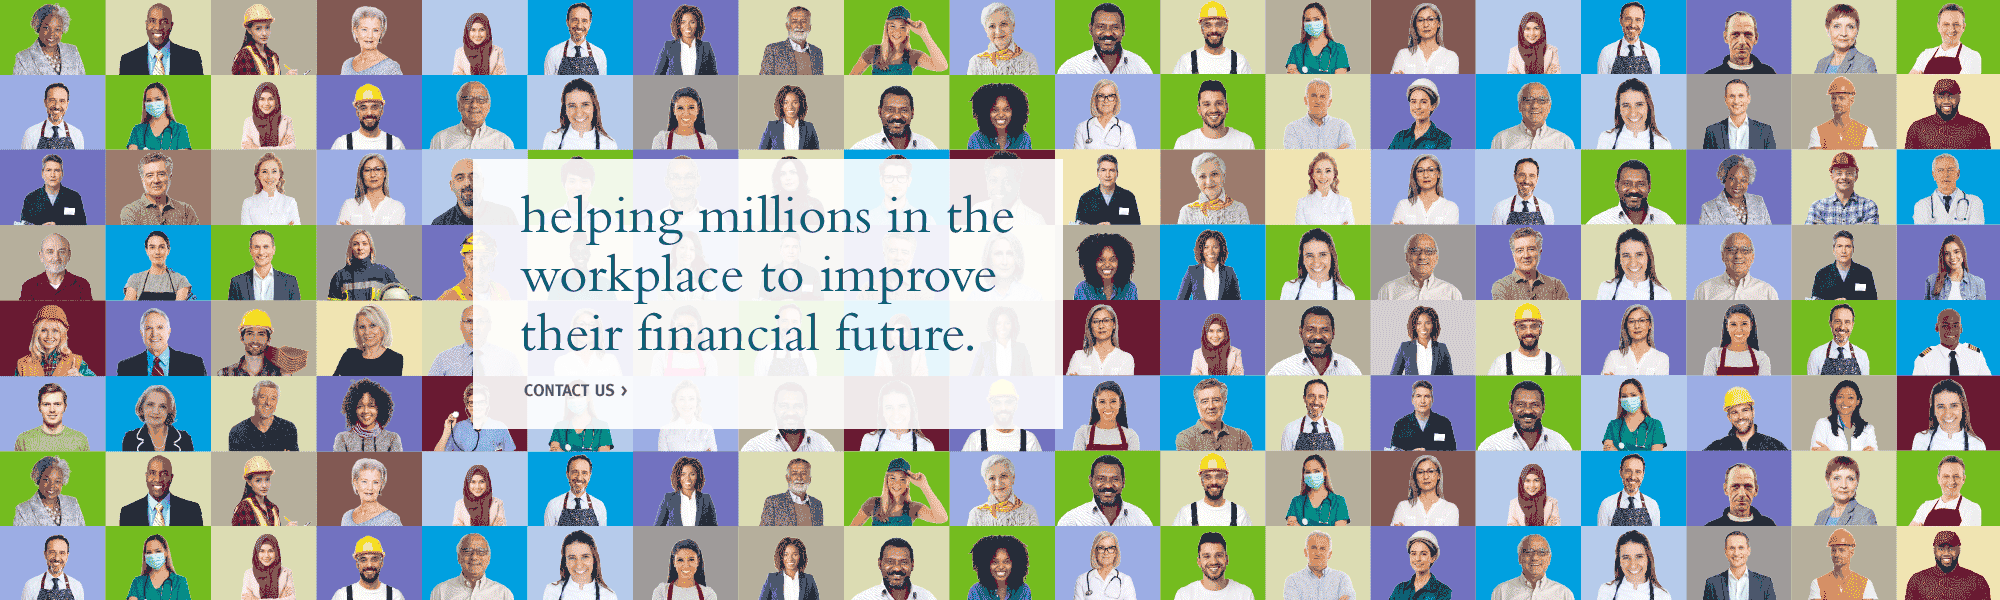 GIF shows lots of customers, smiling, with overlay text reading "helping millions in the workplace to improve their financial future"